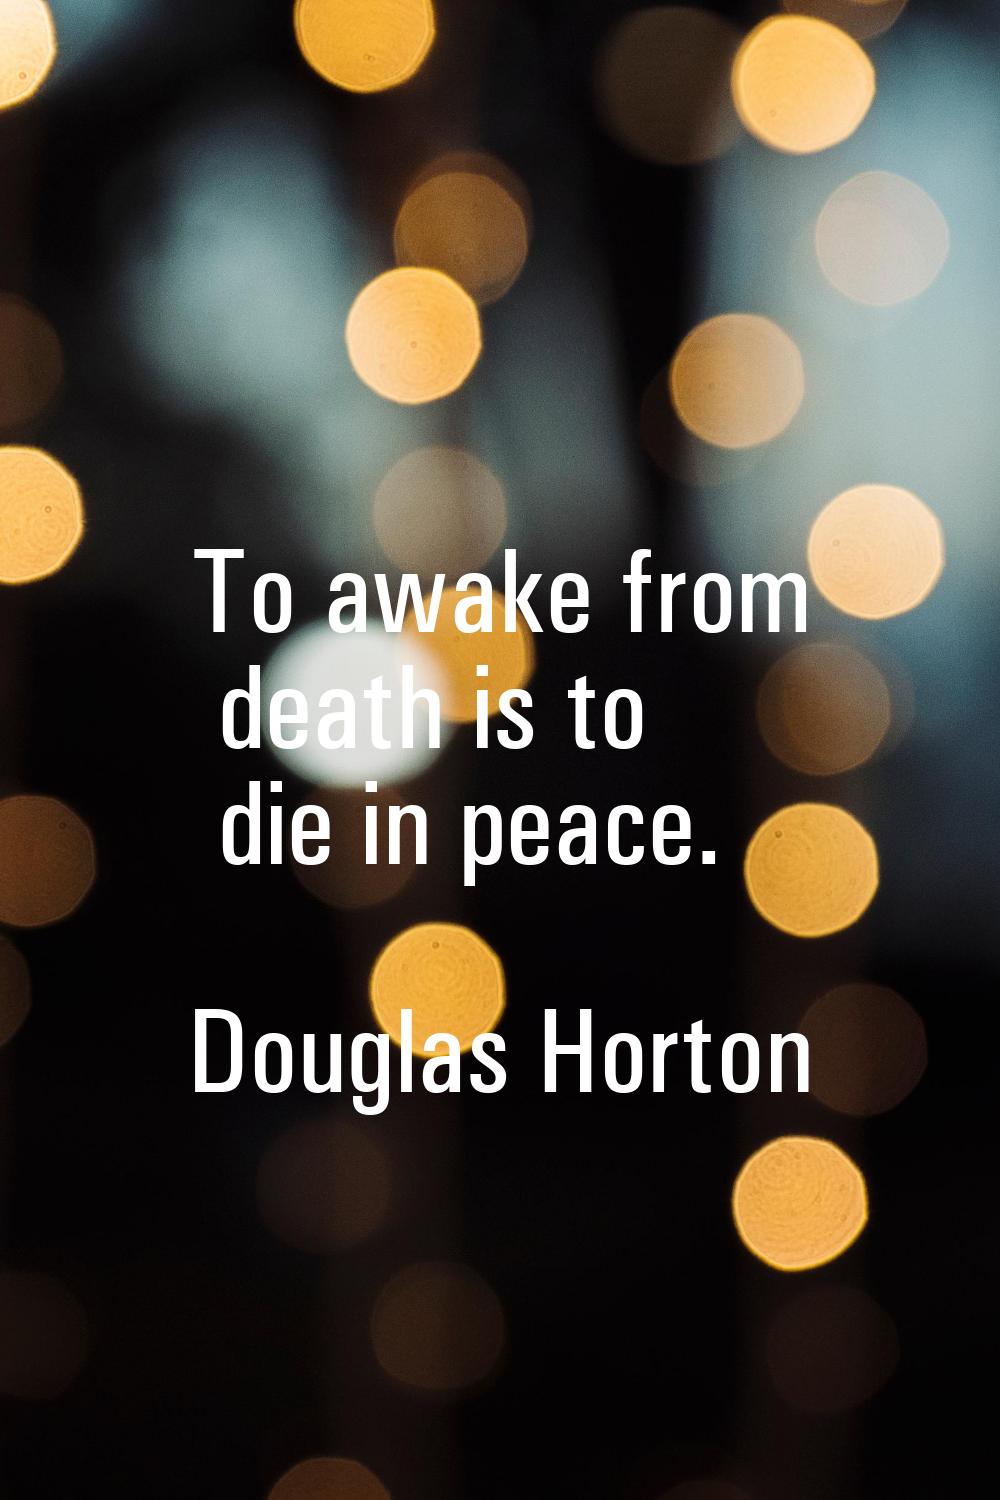 To awake from death is to die in peace.